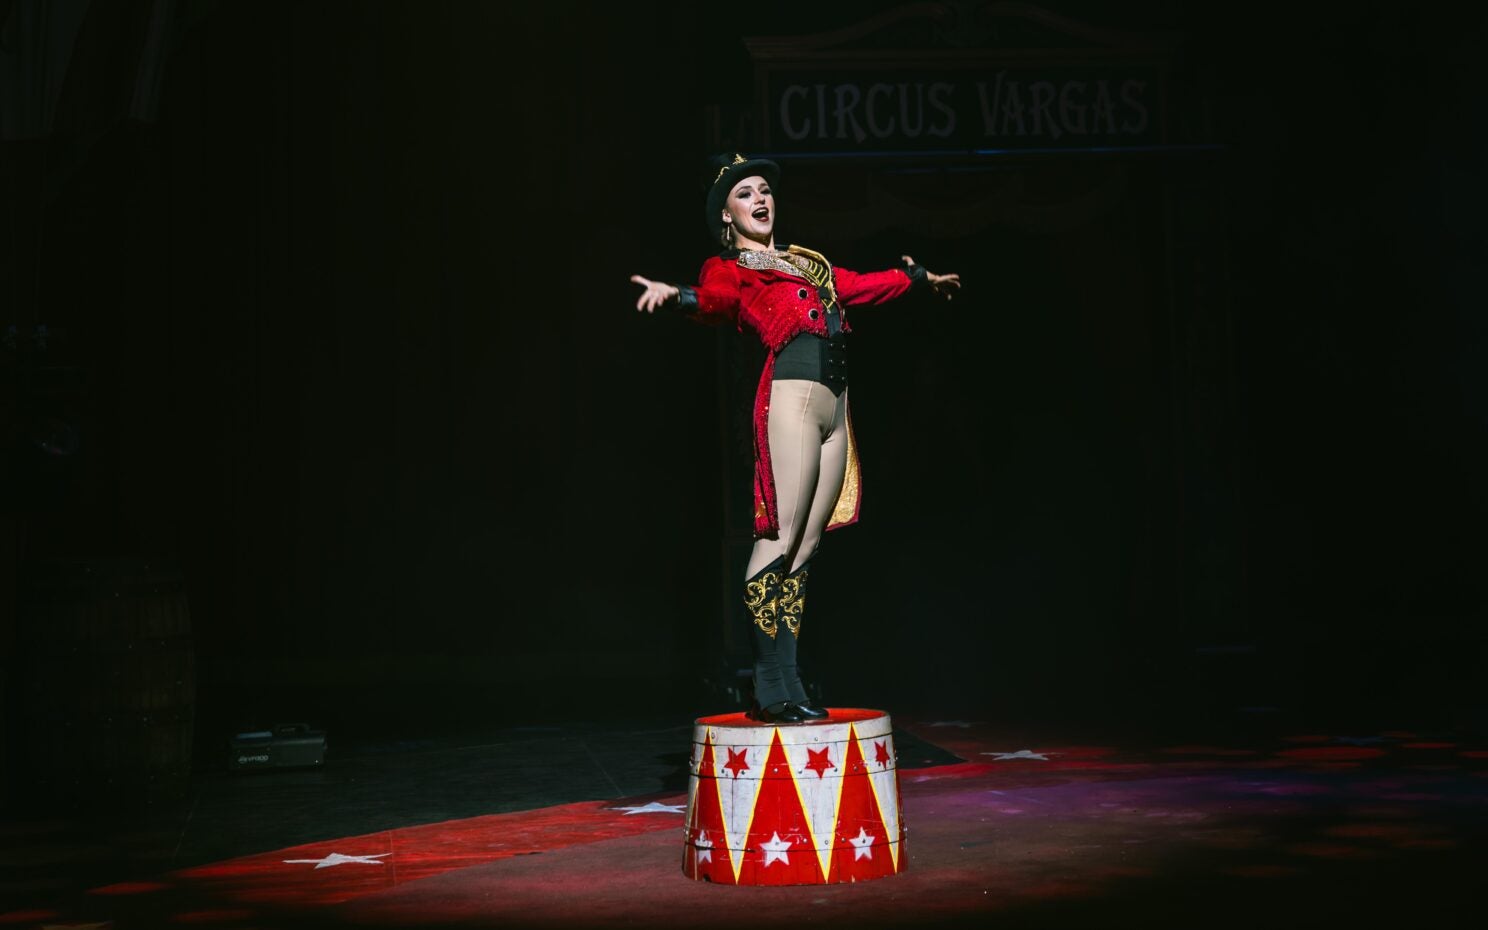 Performer Izzy Patrowicz wearing costume including top hat stands on a barrel at the circus.